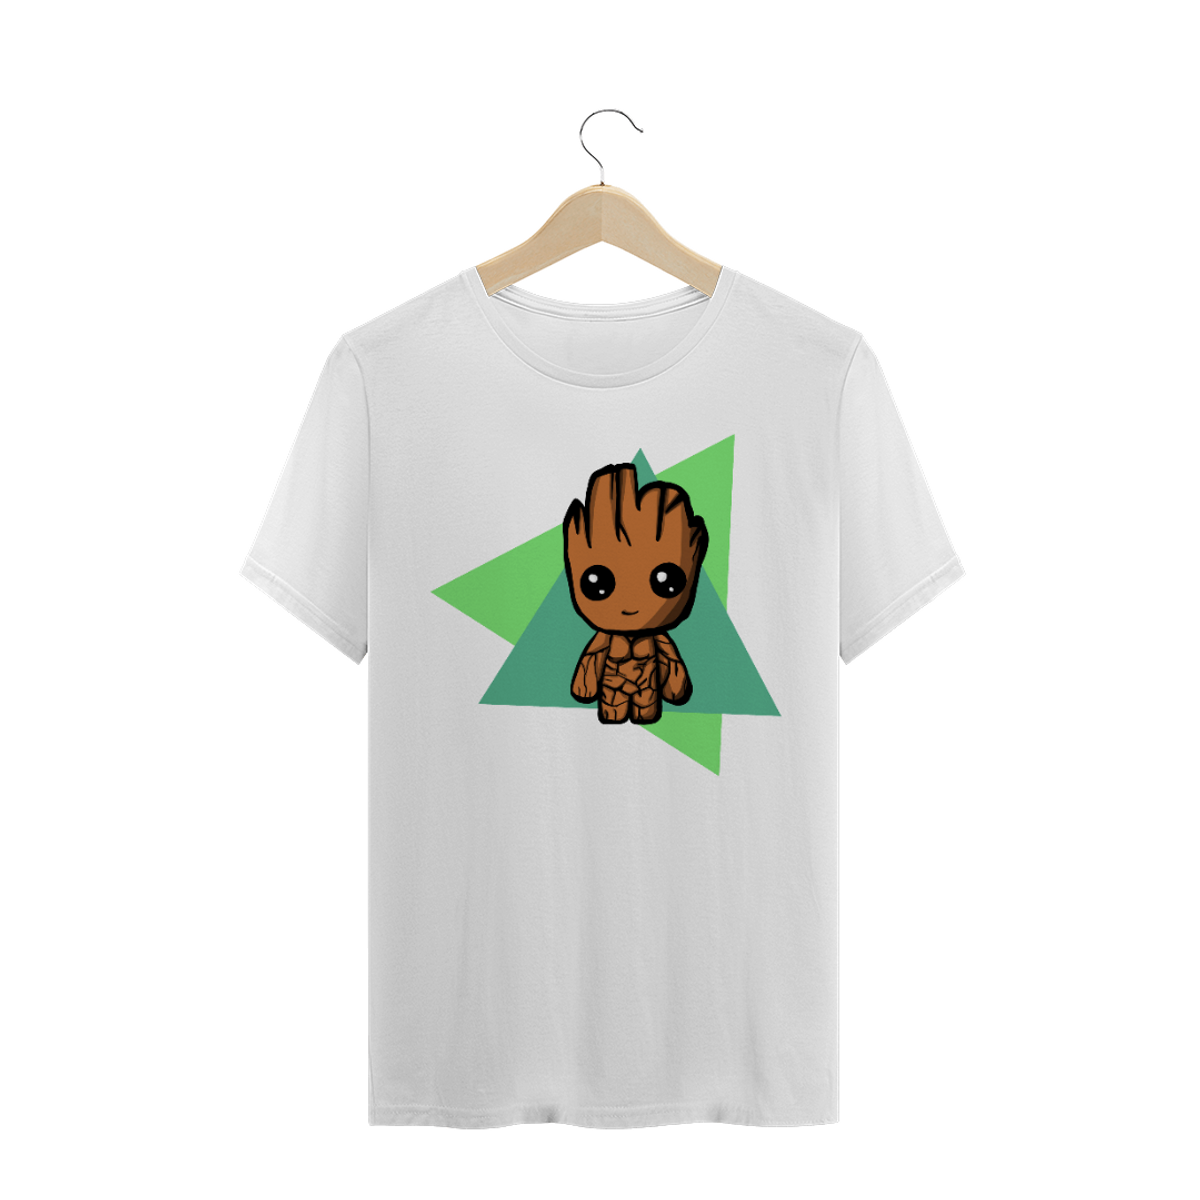 Nome do produtoBaby groot / t-shirt Prime